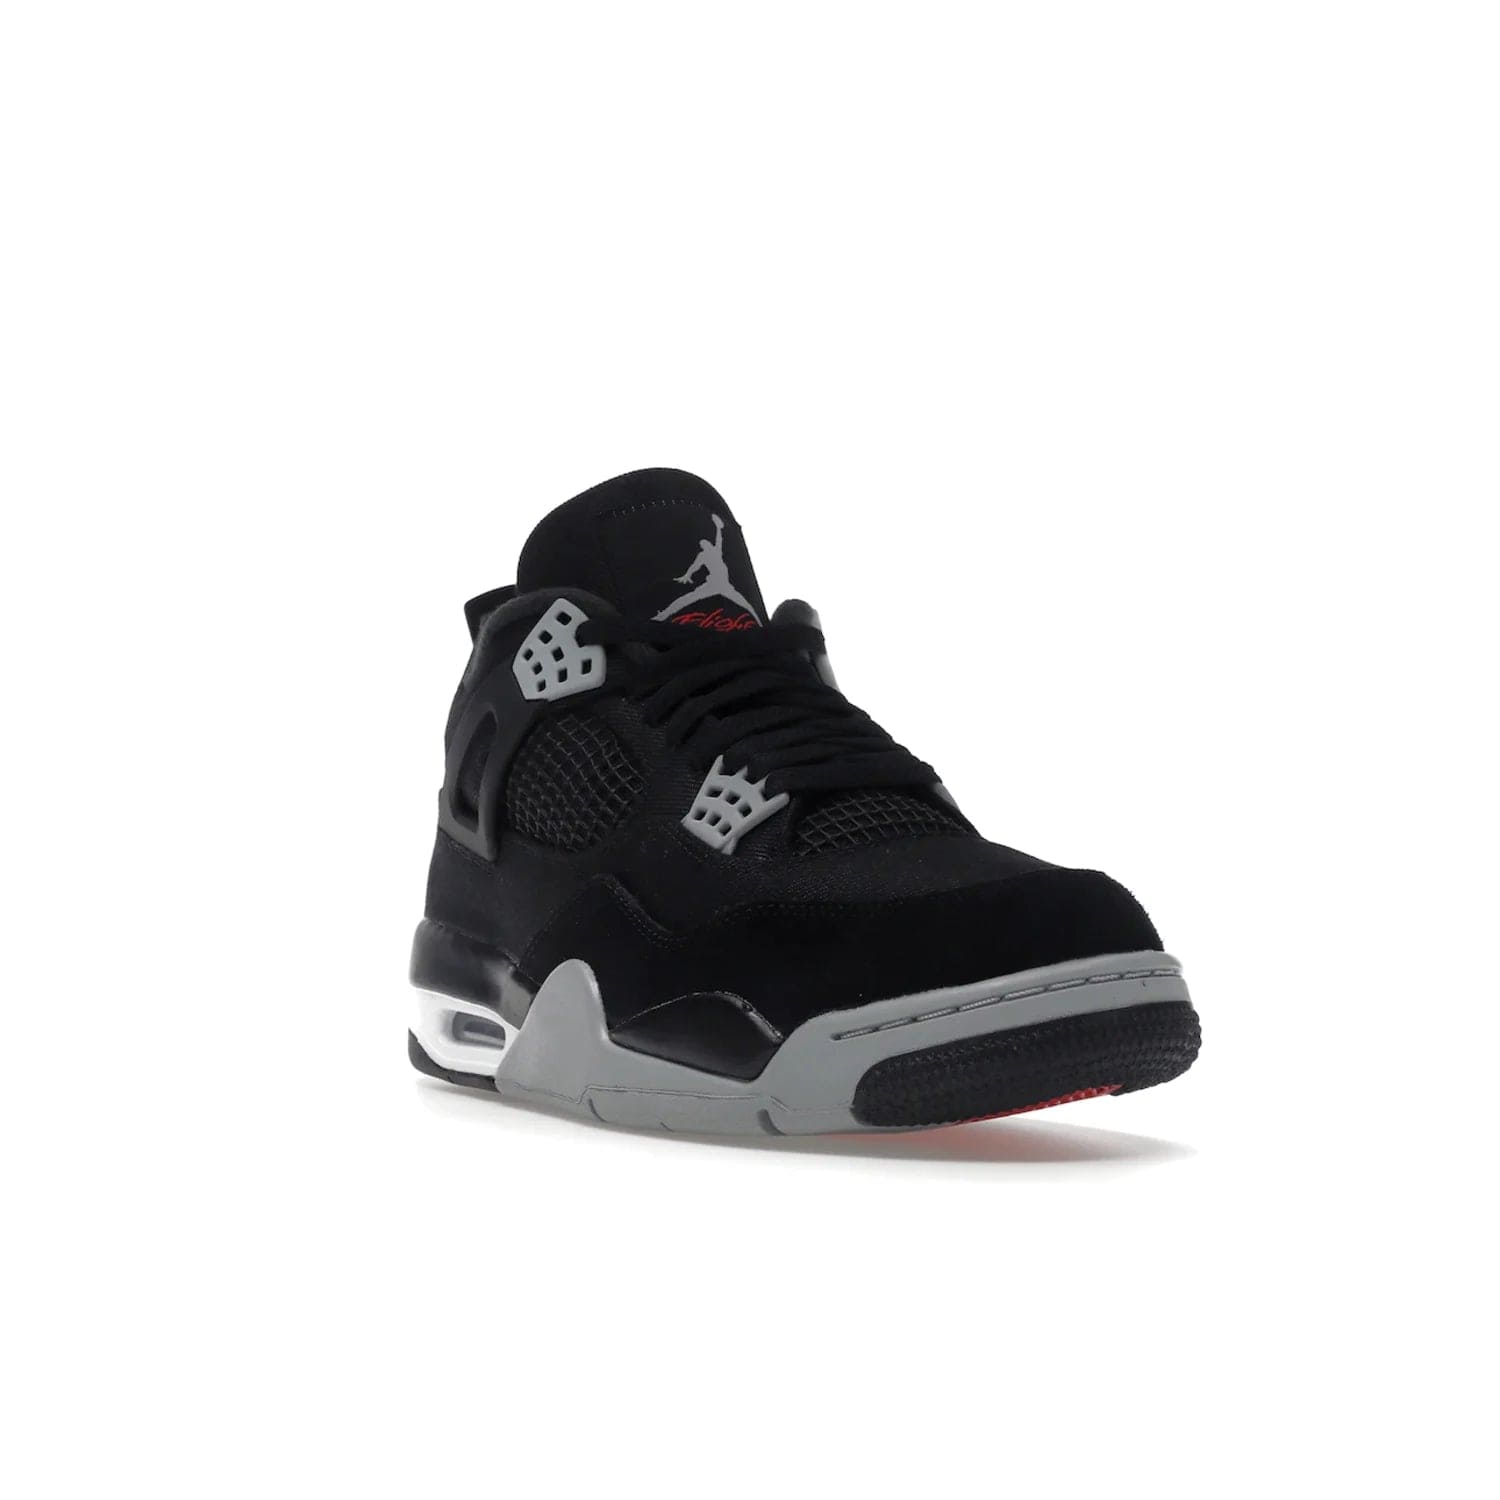 Jordan 4 Retro SE Black Canvas - Image 7 - Only at www.BallersClubKickz.com - The Air Jordan 4 Retro SE Black Canvas brings timeless style and modern luxury. Classic mid-top sneaker in black canvas and grey suede with tonal Jumpman logo, Flight logo and polyurethane midsole with visible Air-sole cushioning. Refresh your sneaker collection and rock the Air Jordan 4 Retro SE Black Canvas.